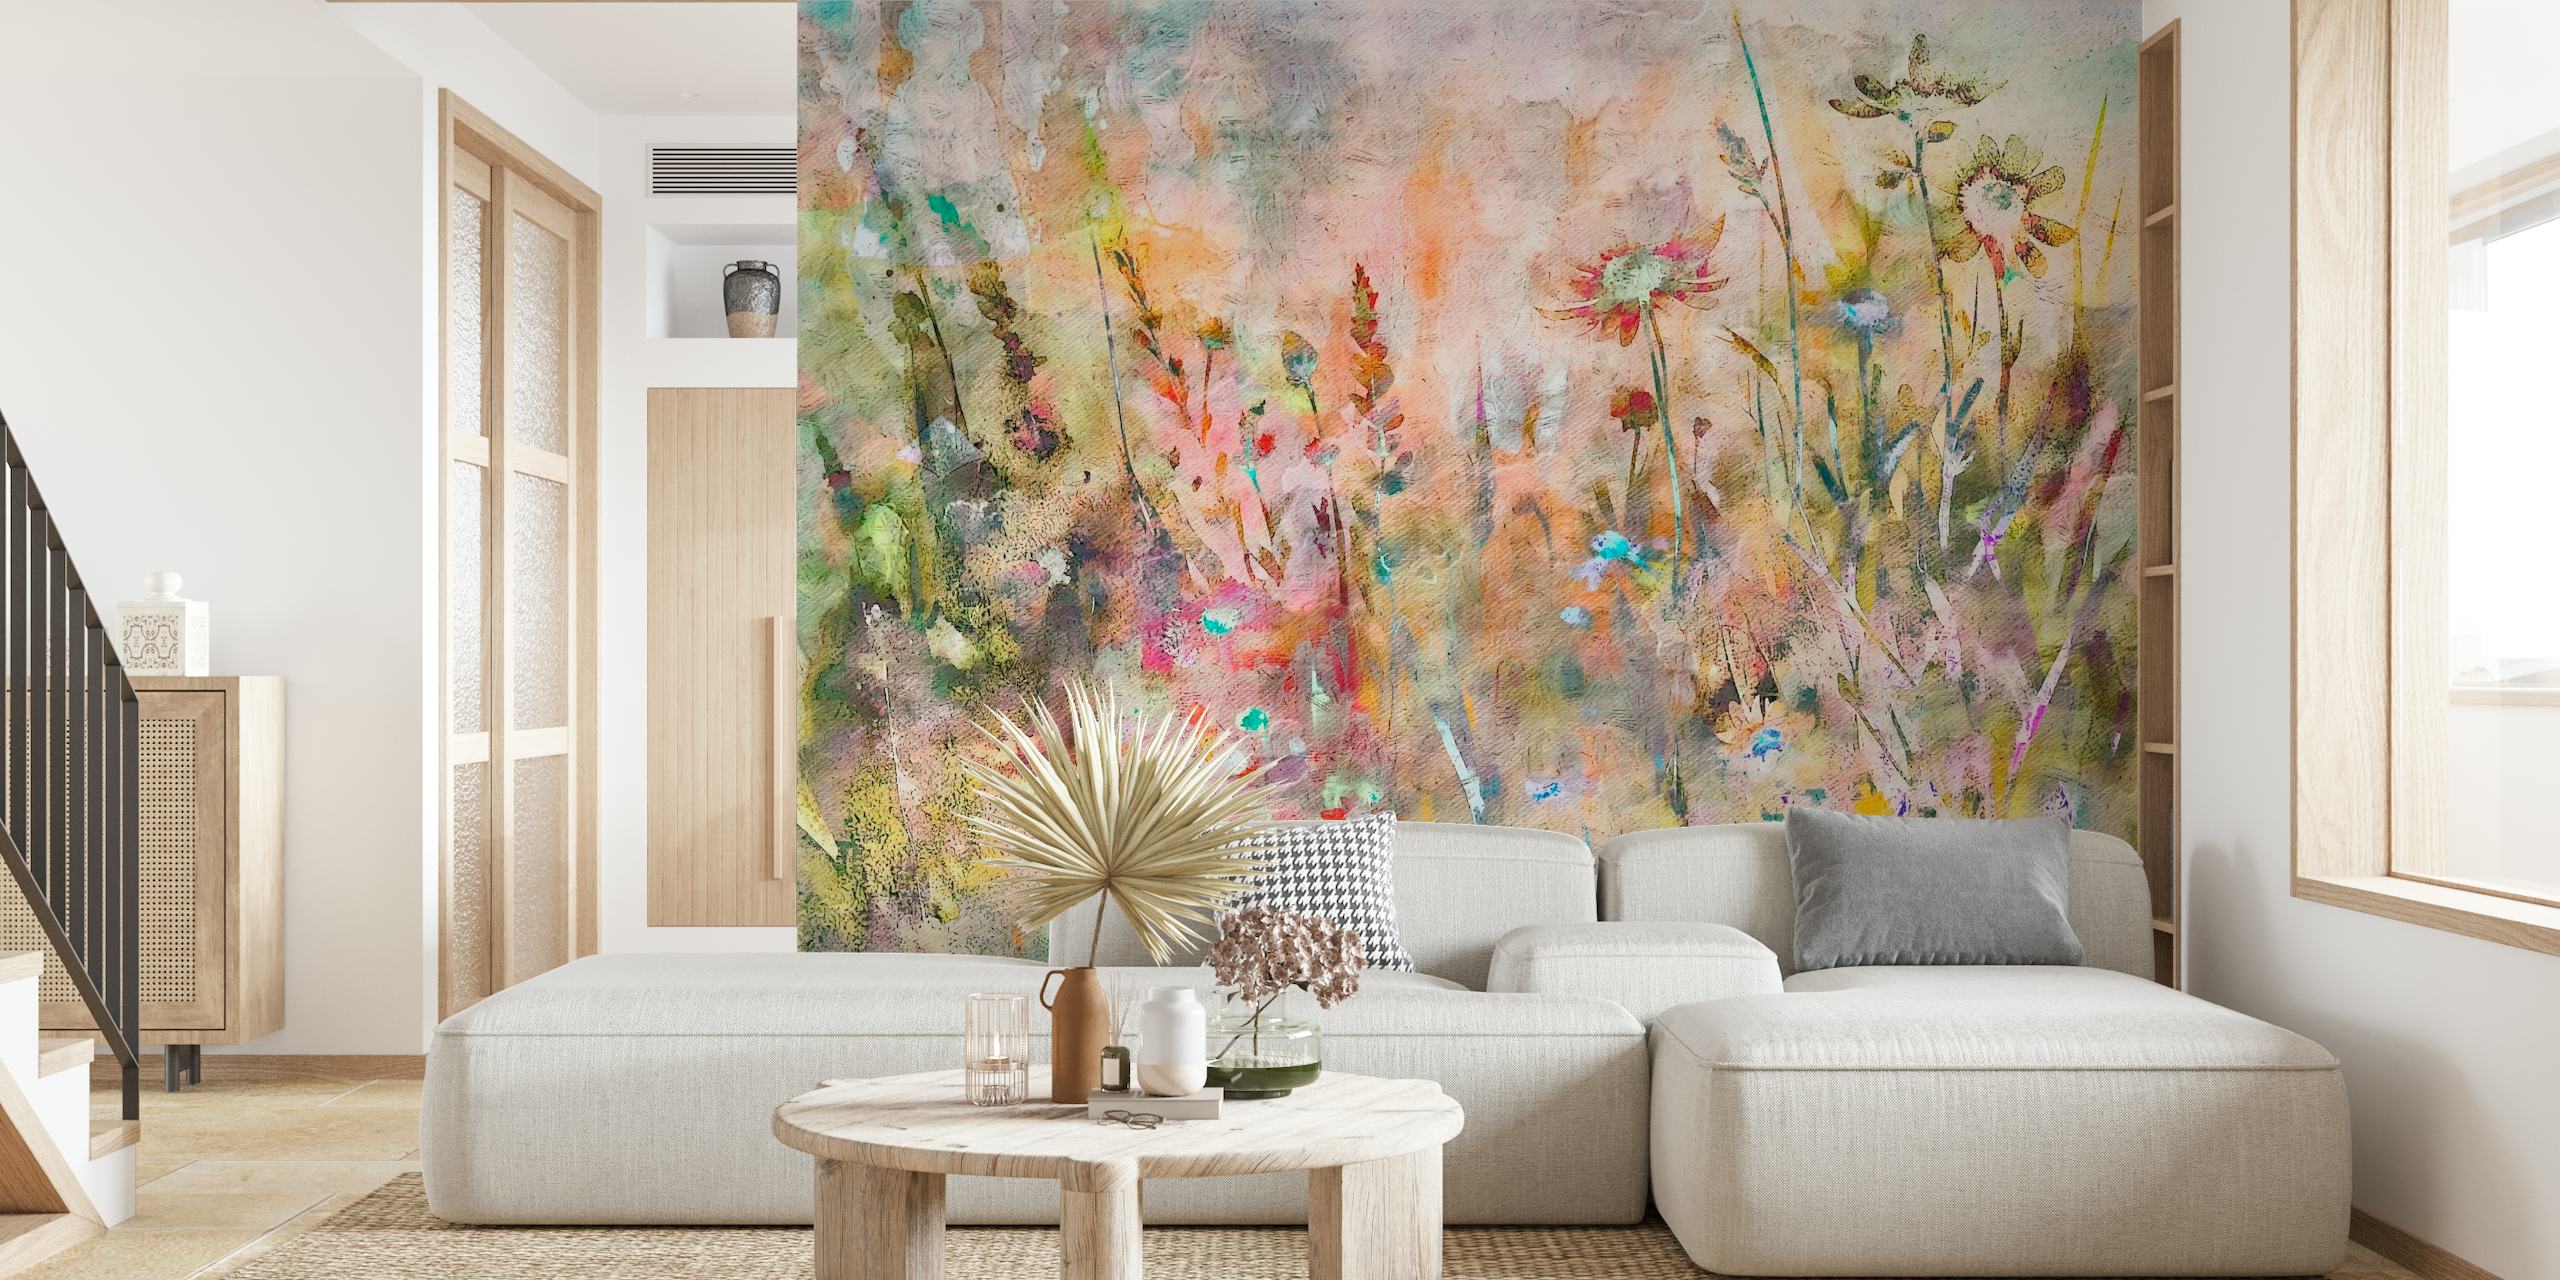 A watercolor mural of wildflowers with a soft mix of colors